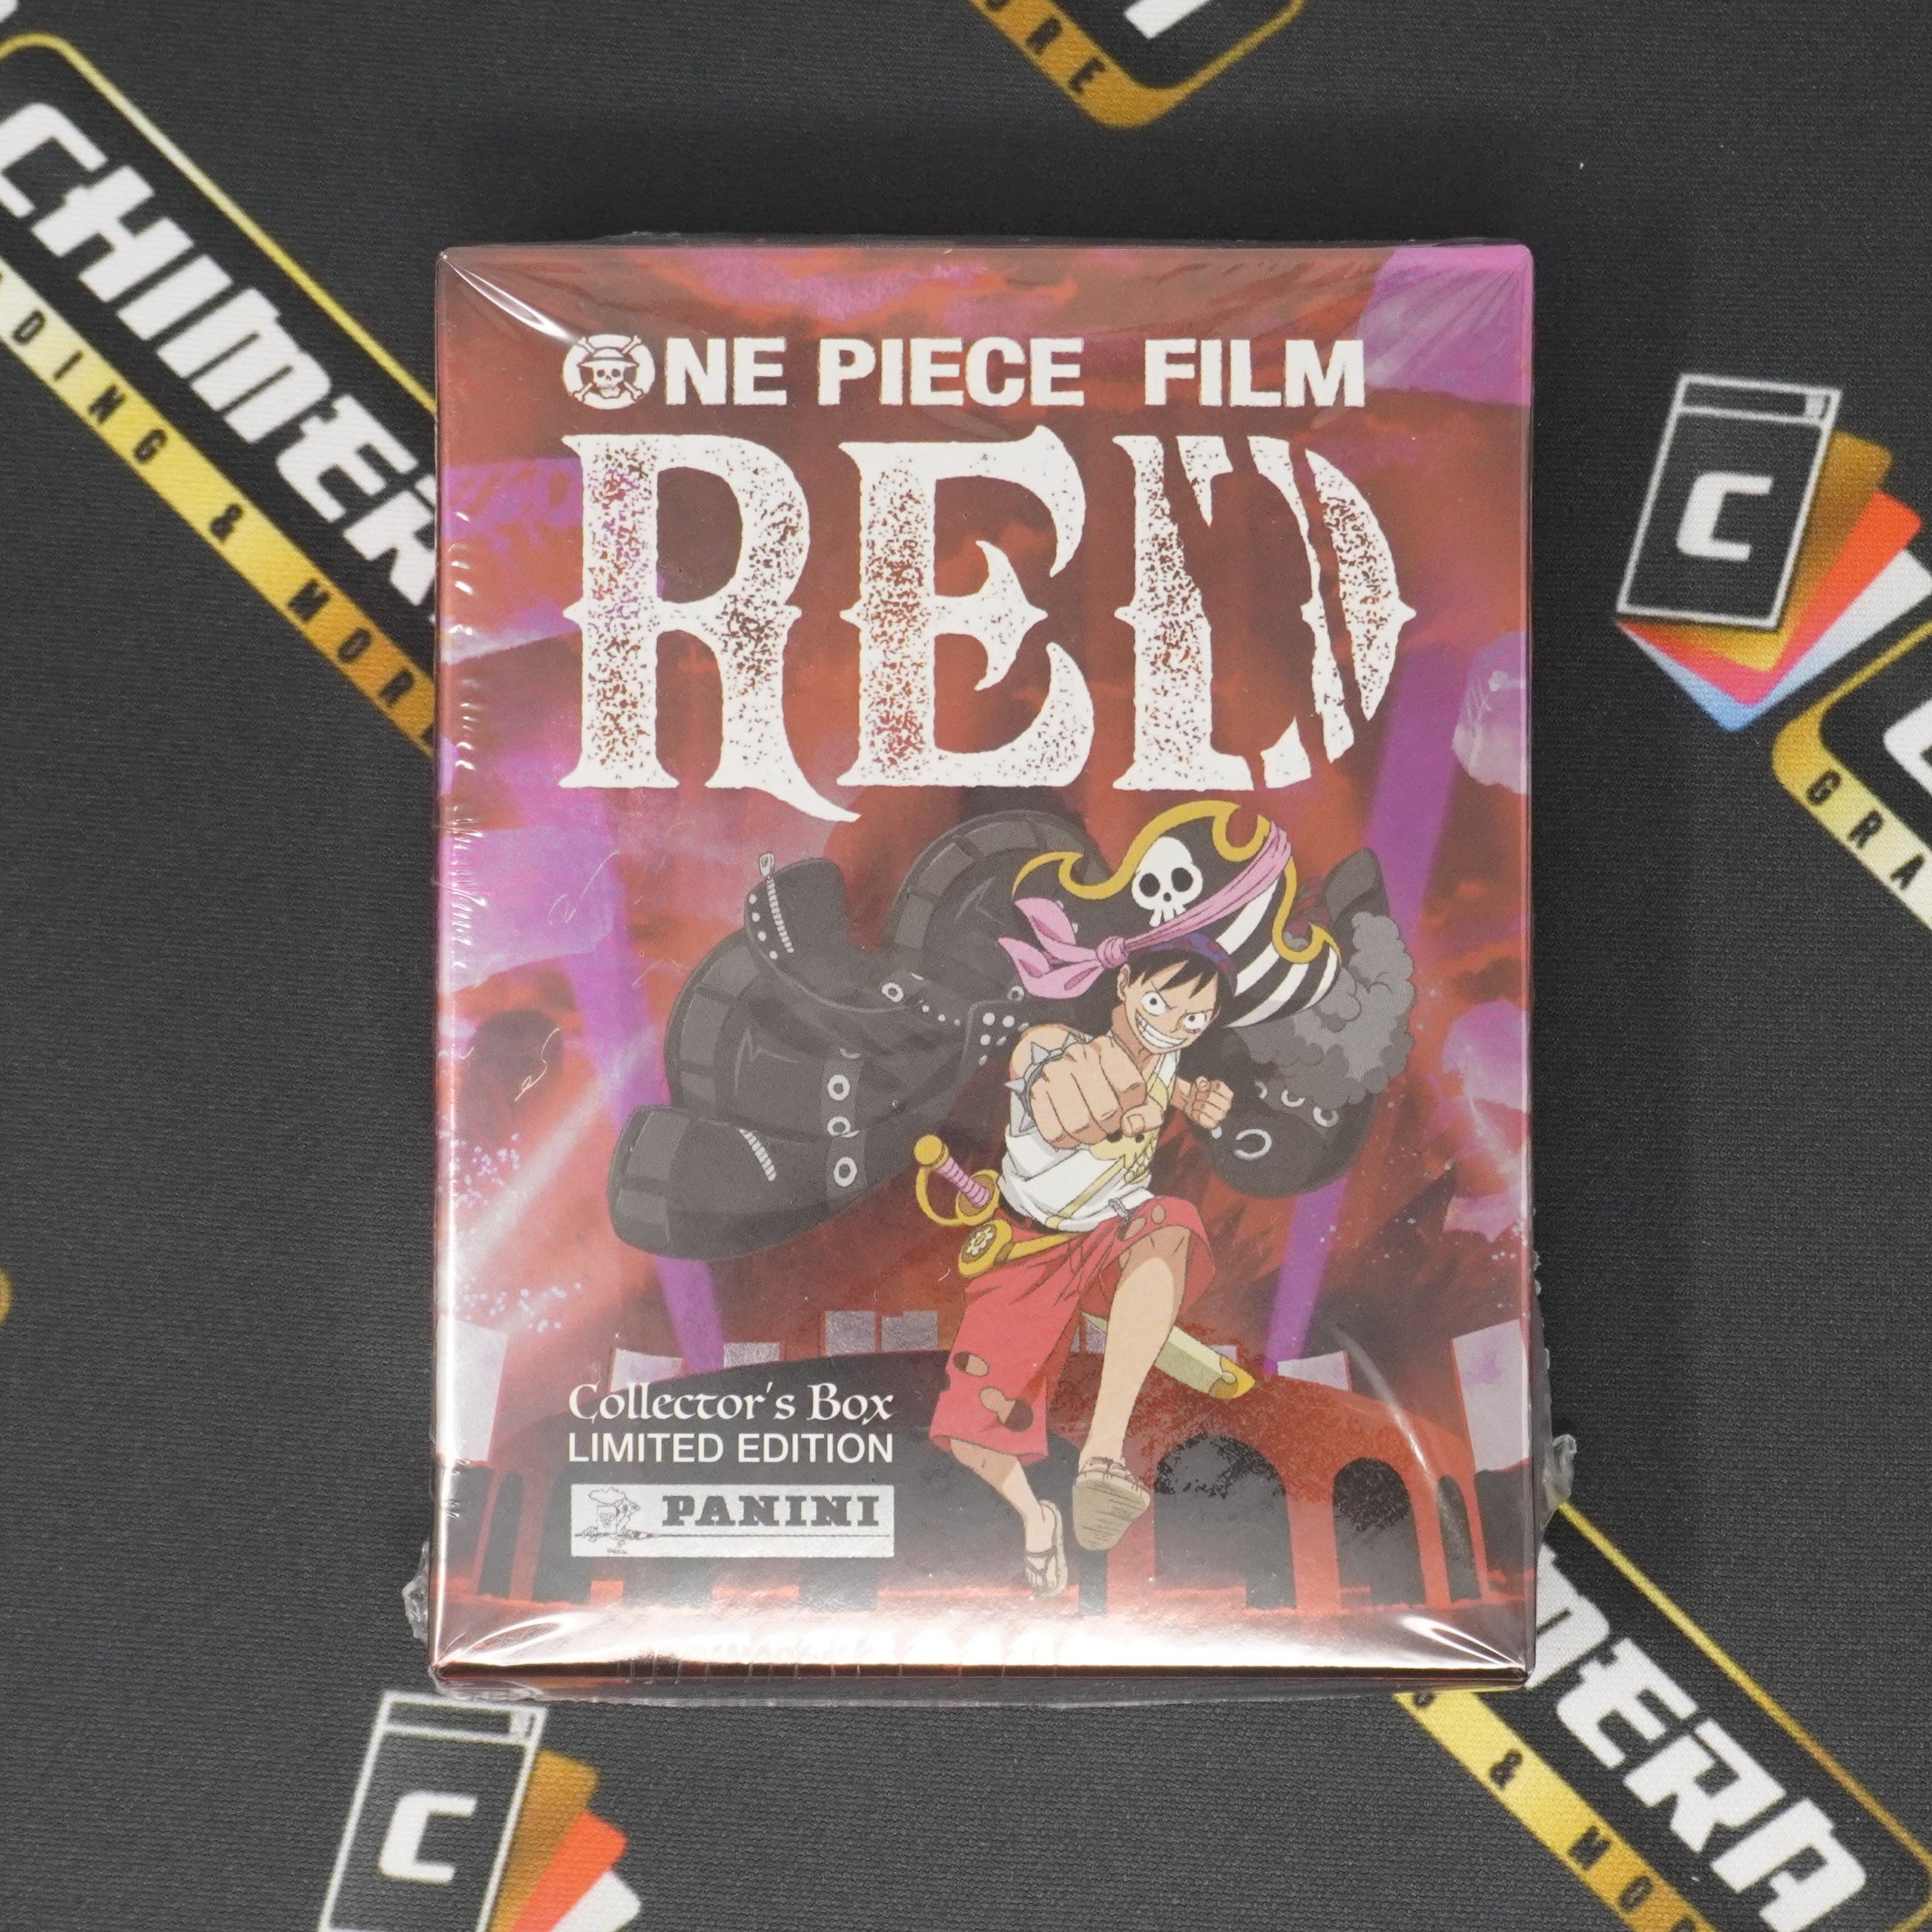 ONE PIECE RED TC - Coffret Collector